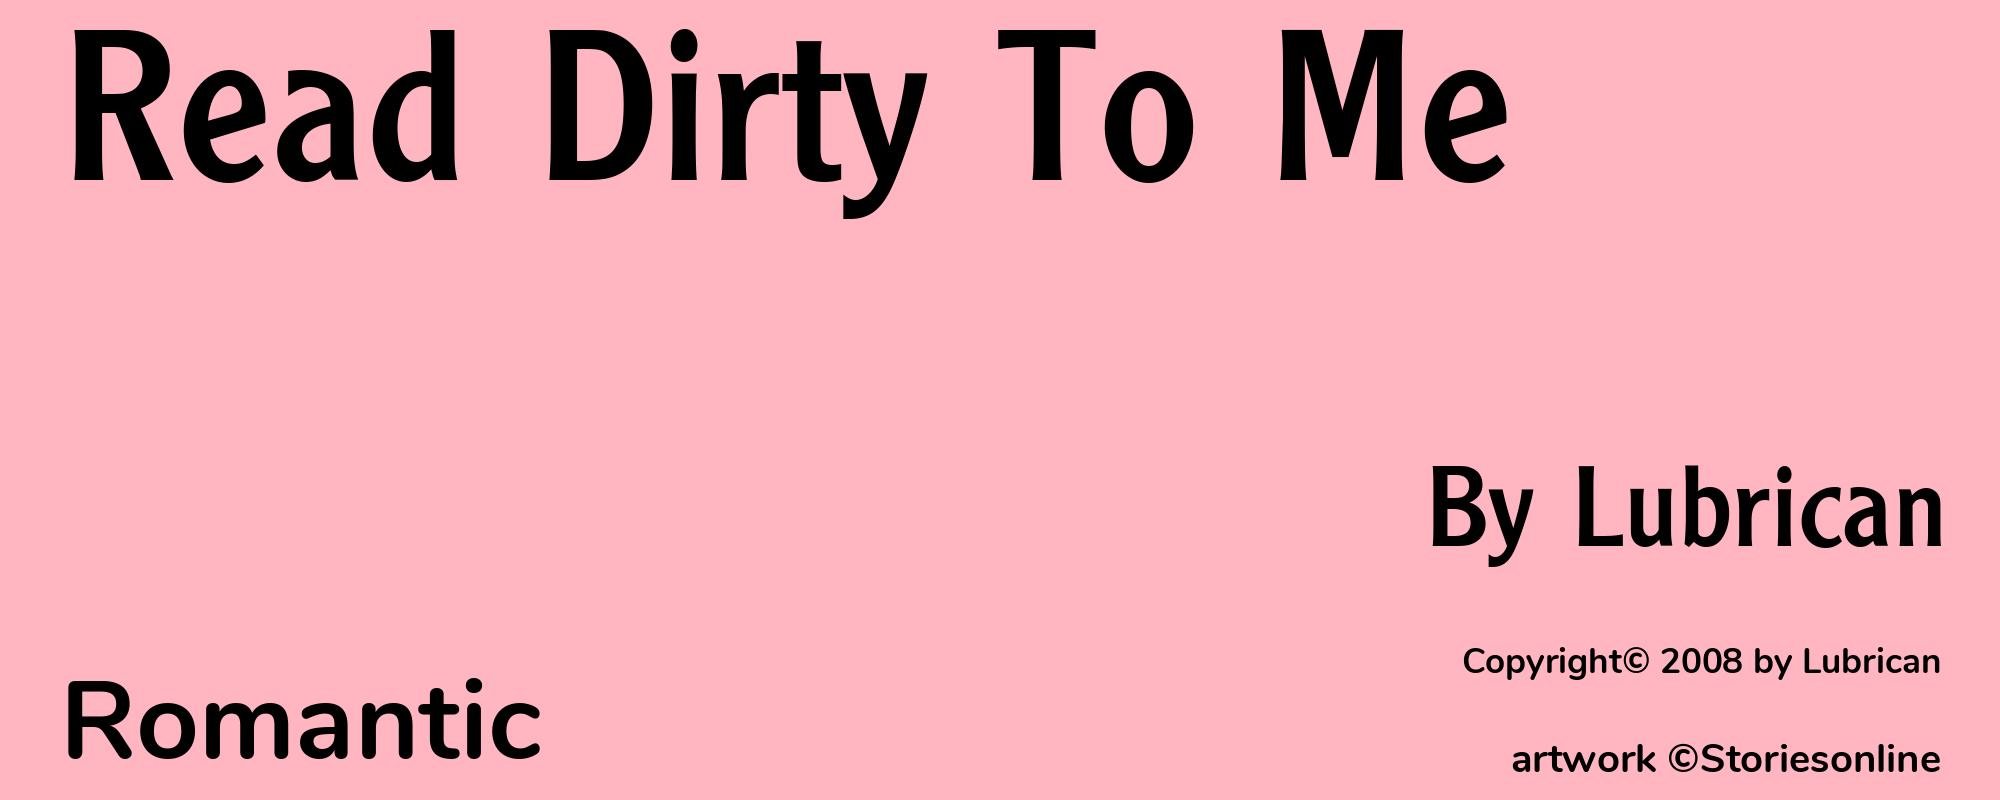 Read Dirty To Me - Cover